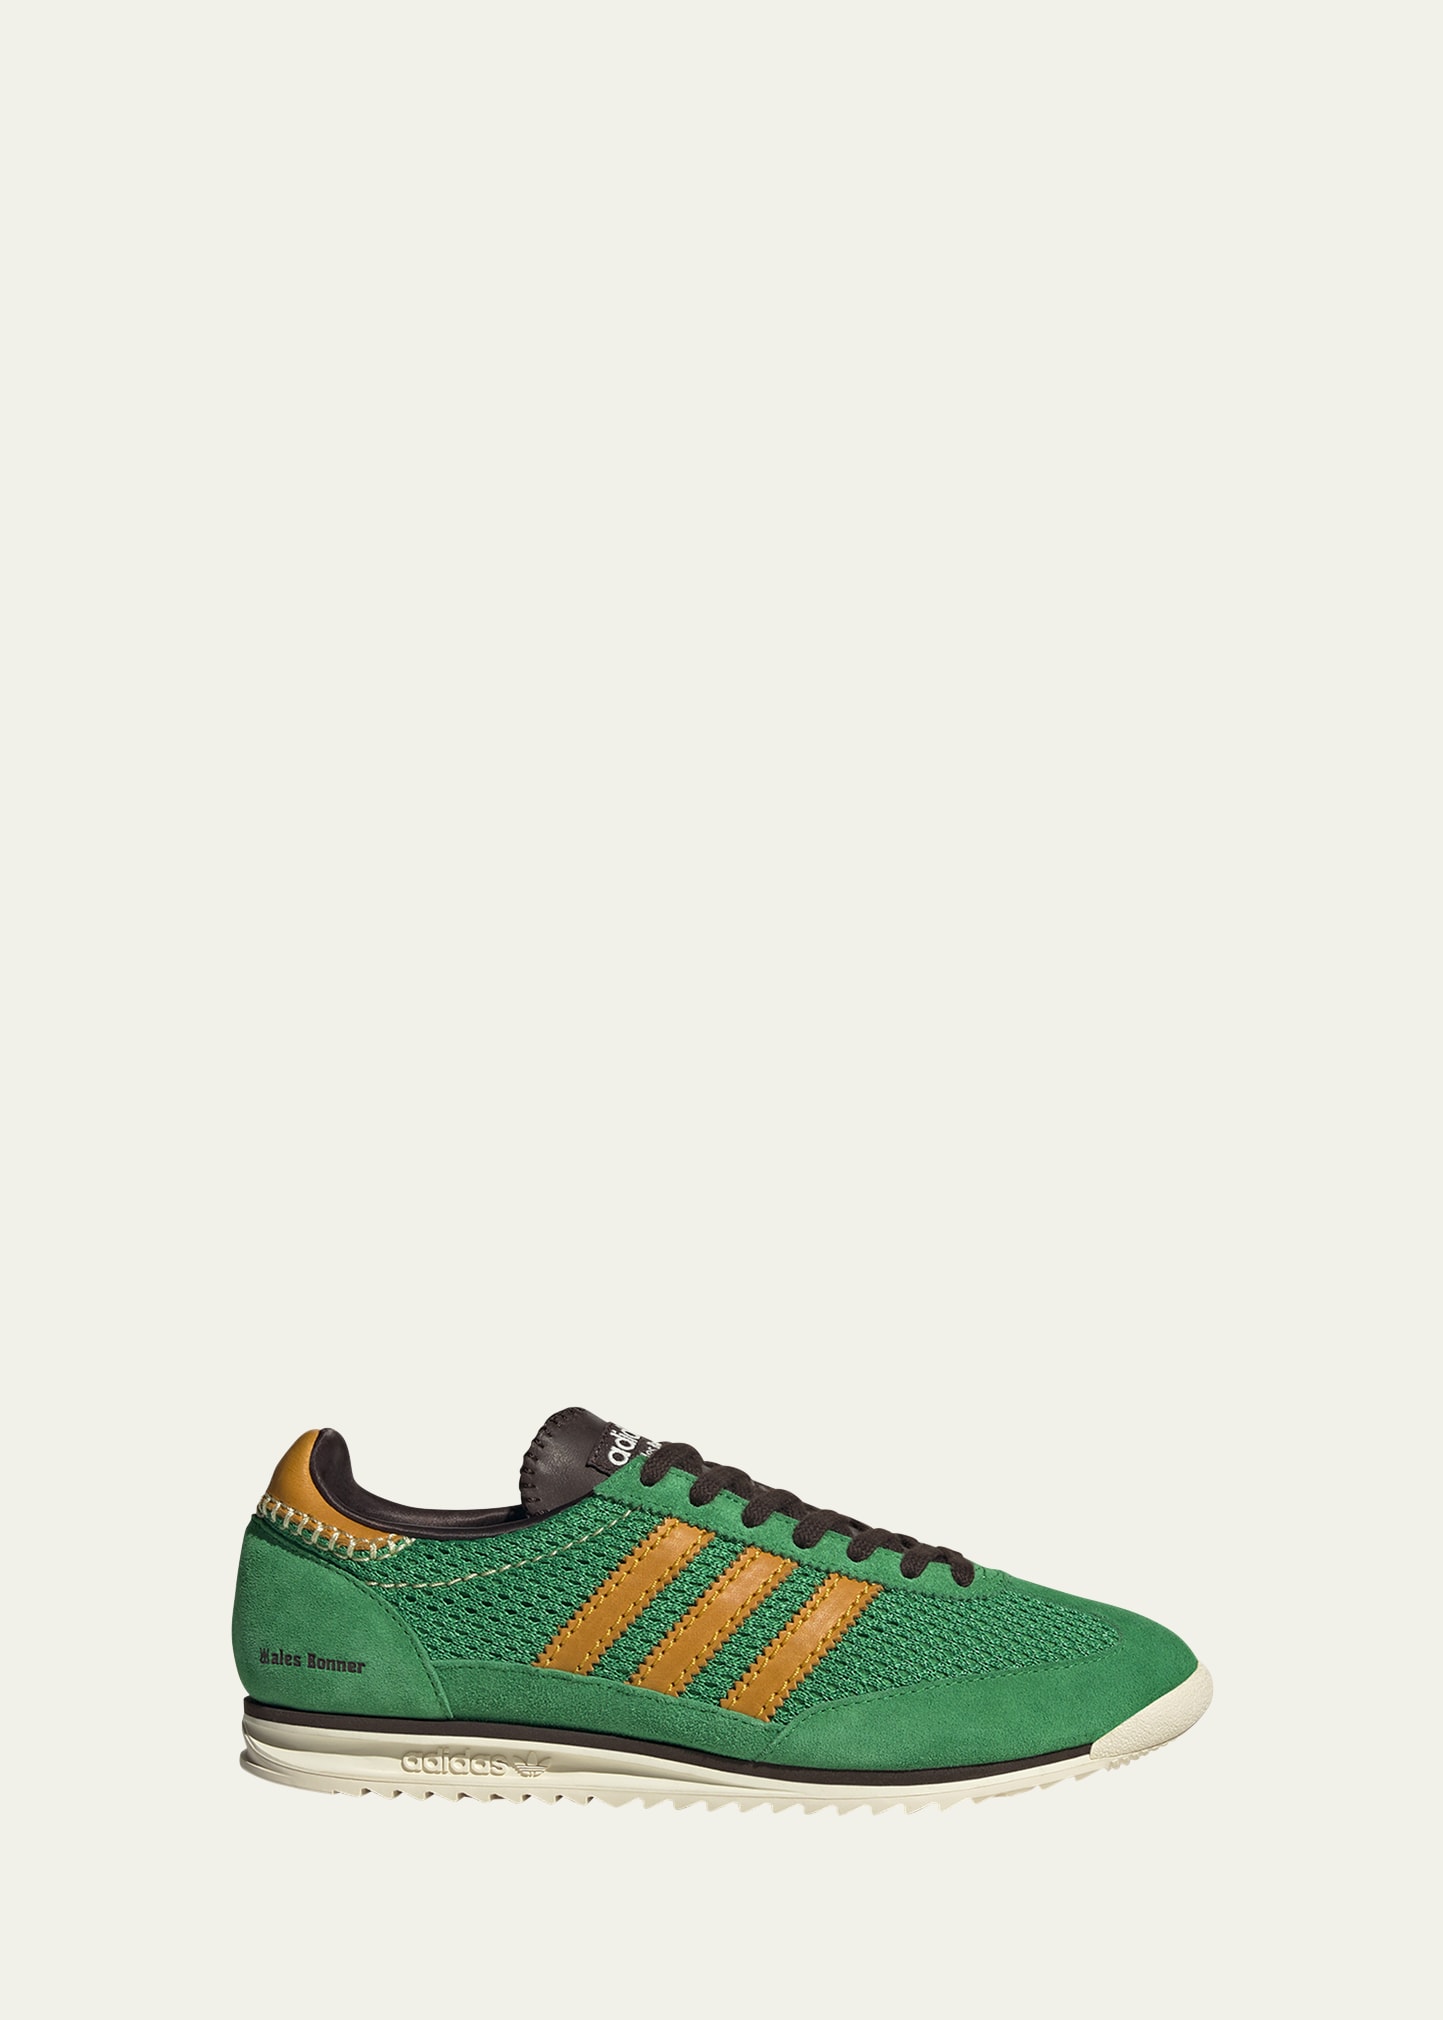 Adidas X Wales Bonner X Wales Bonner Tricolor Knit Sneakers In Team Green Colleg